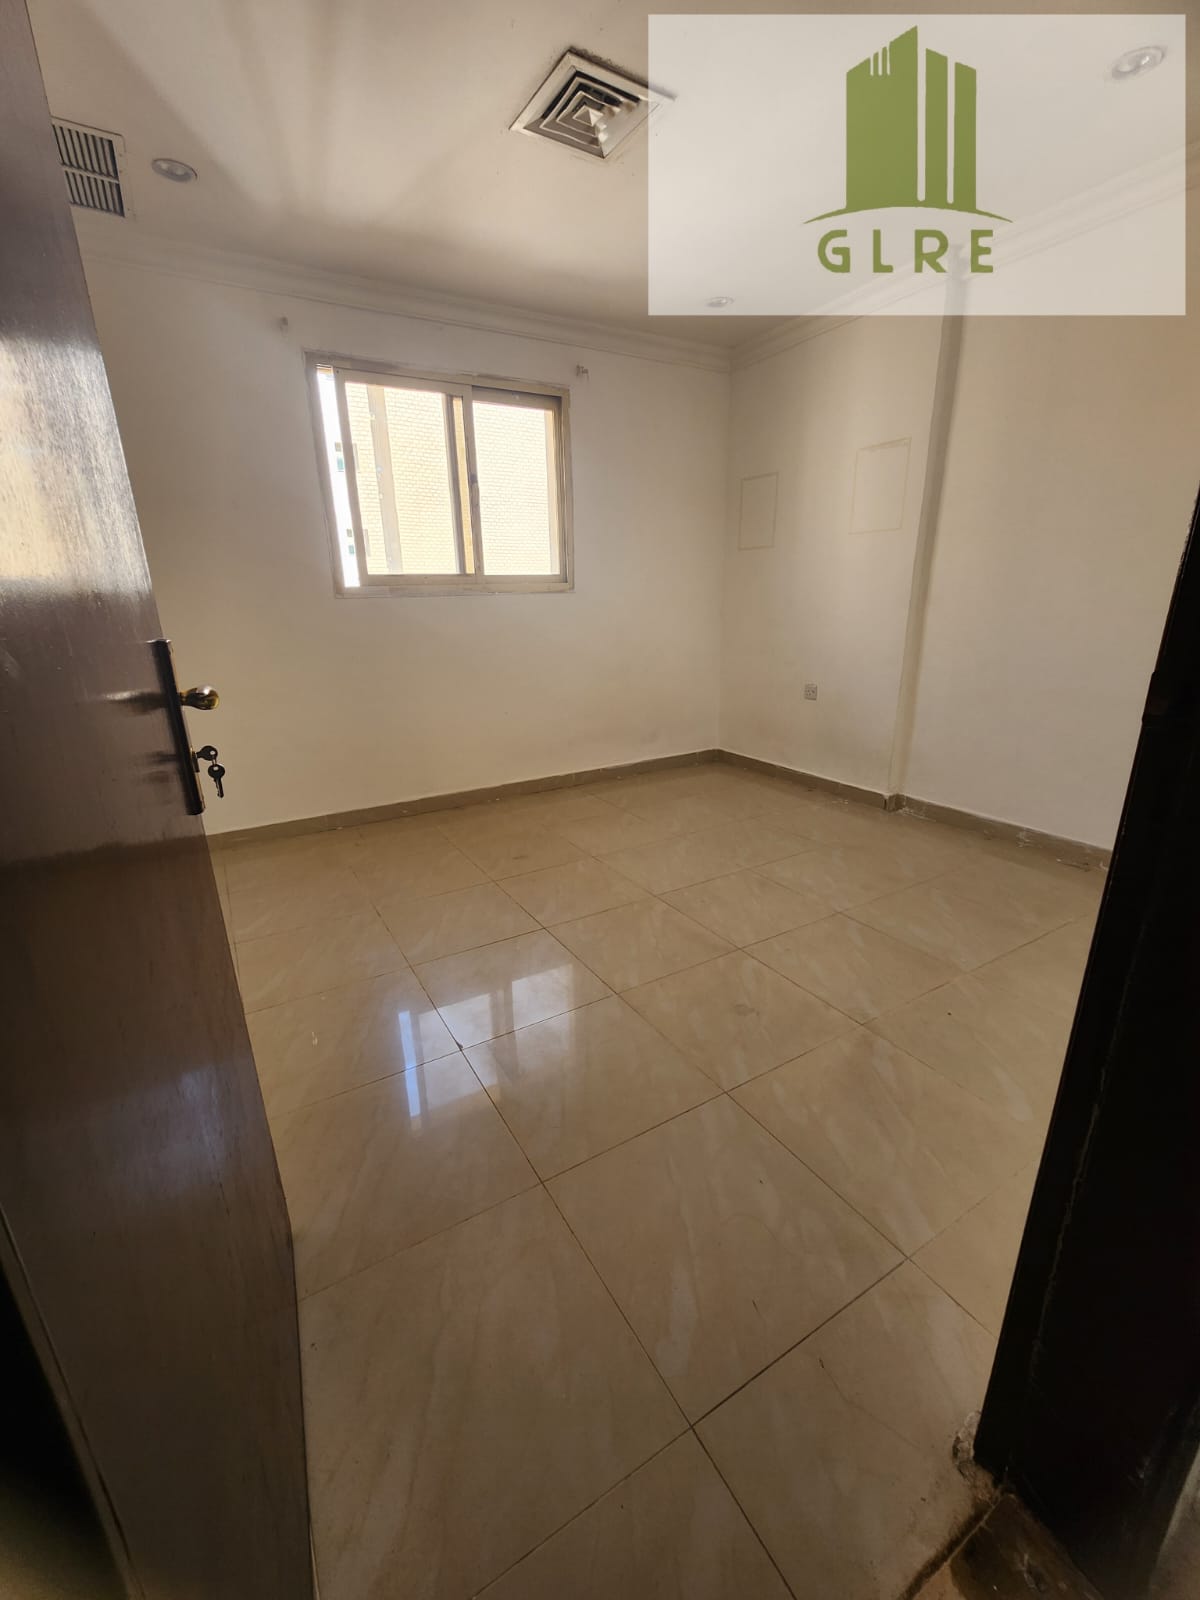 Apartment for rent in salmyia b12 consisting of two rooms, a maid’s room